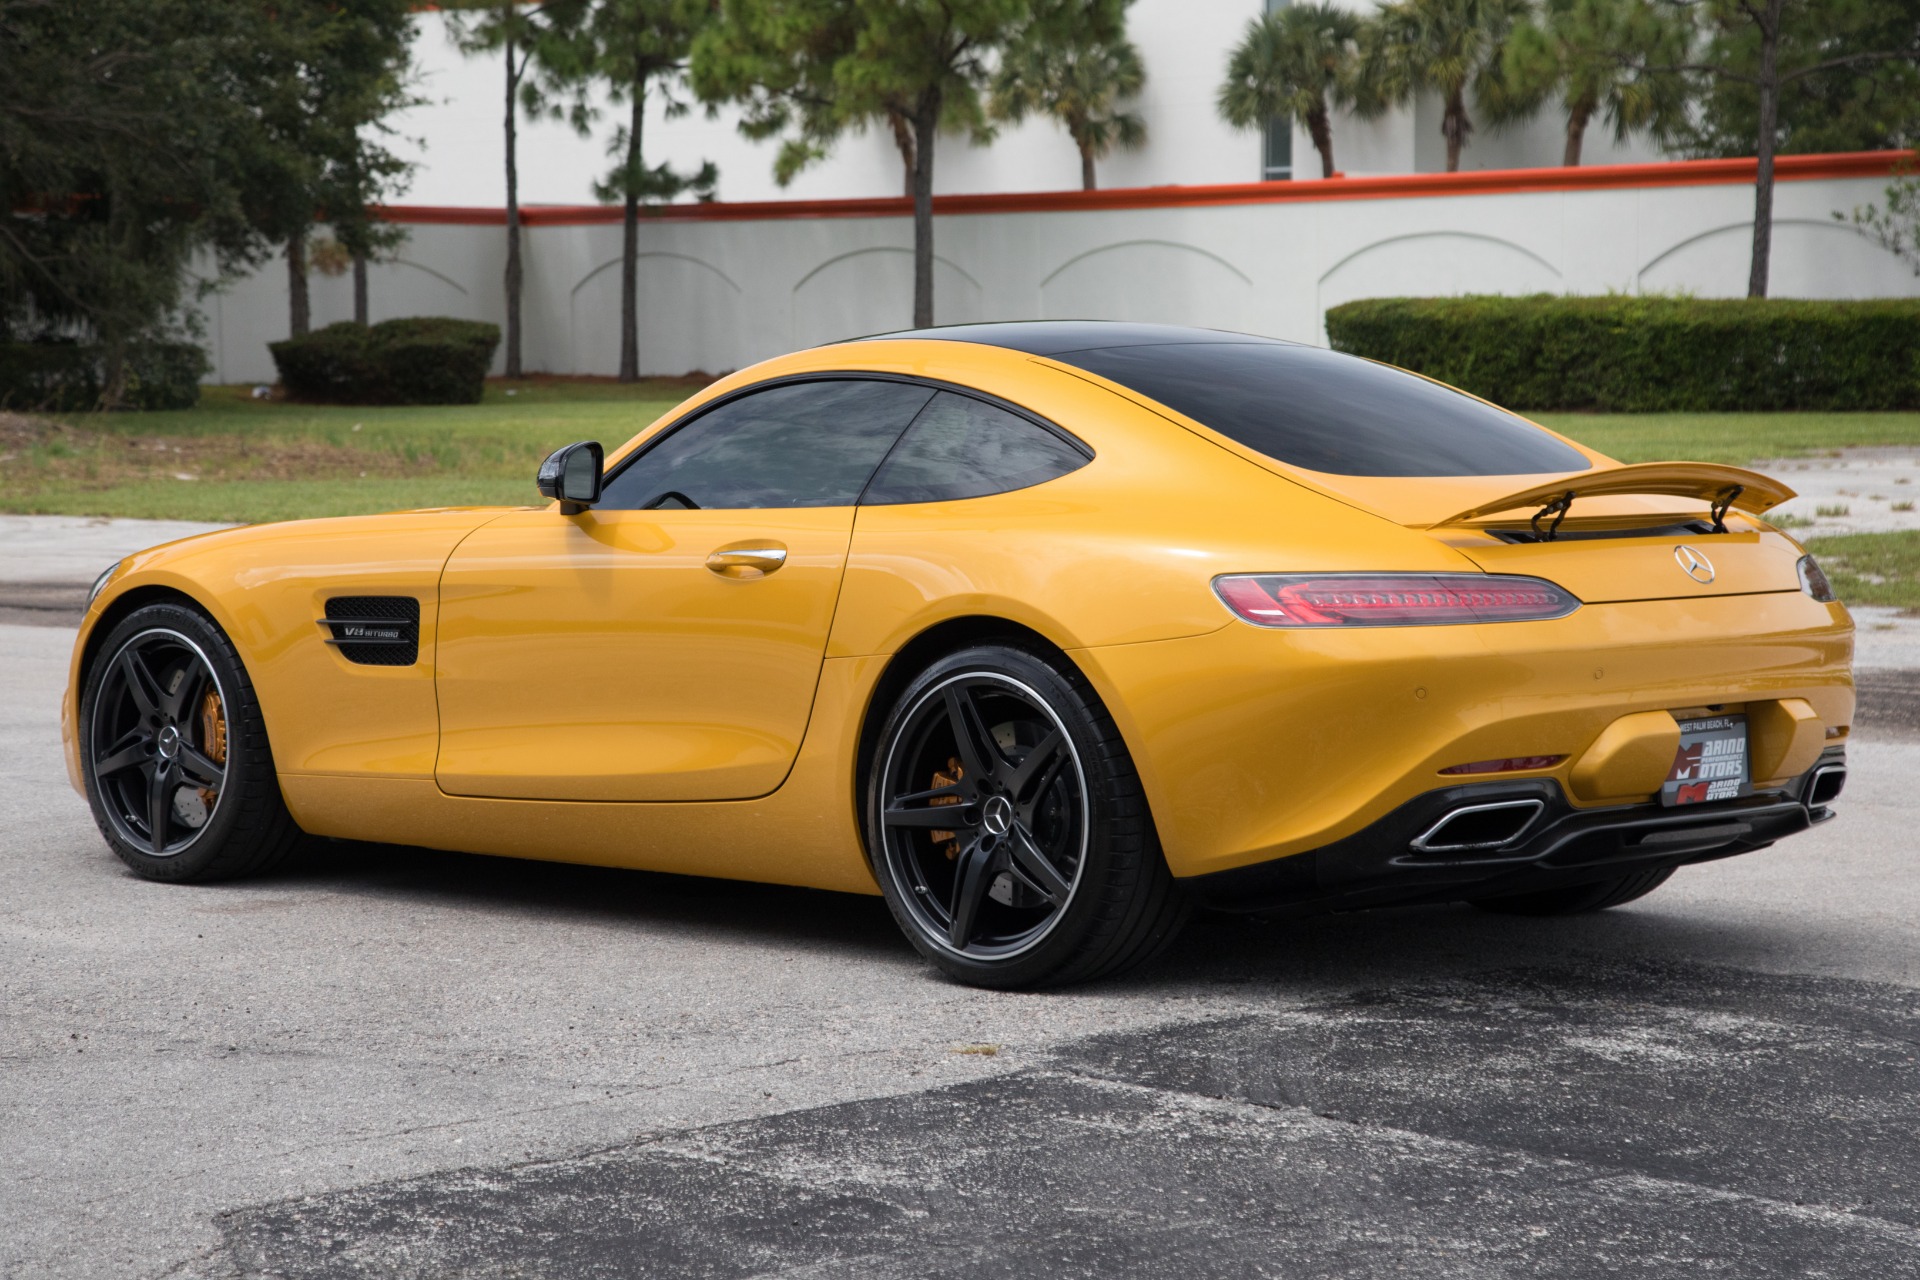 Used 2016 Mercedes Benz Amg Gt S For Sale 94900 Marino